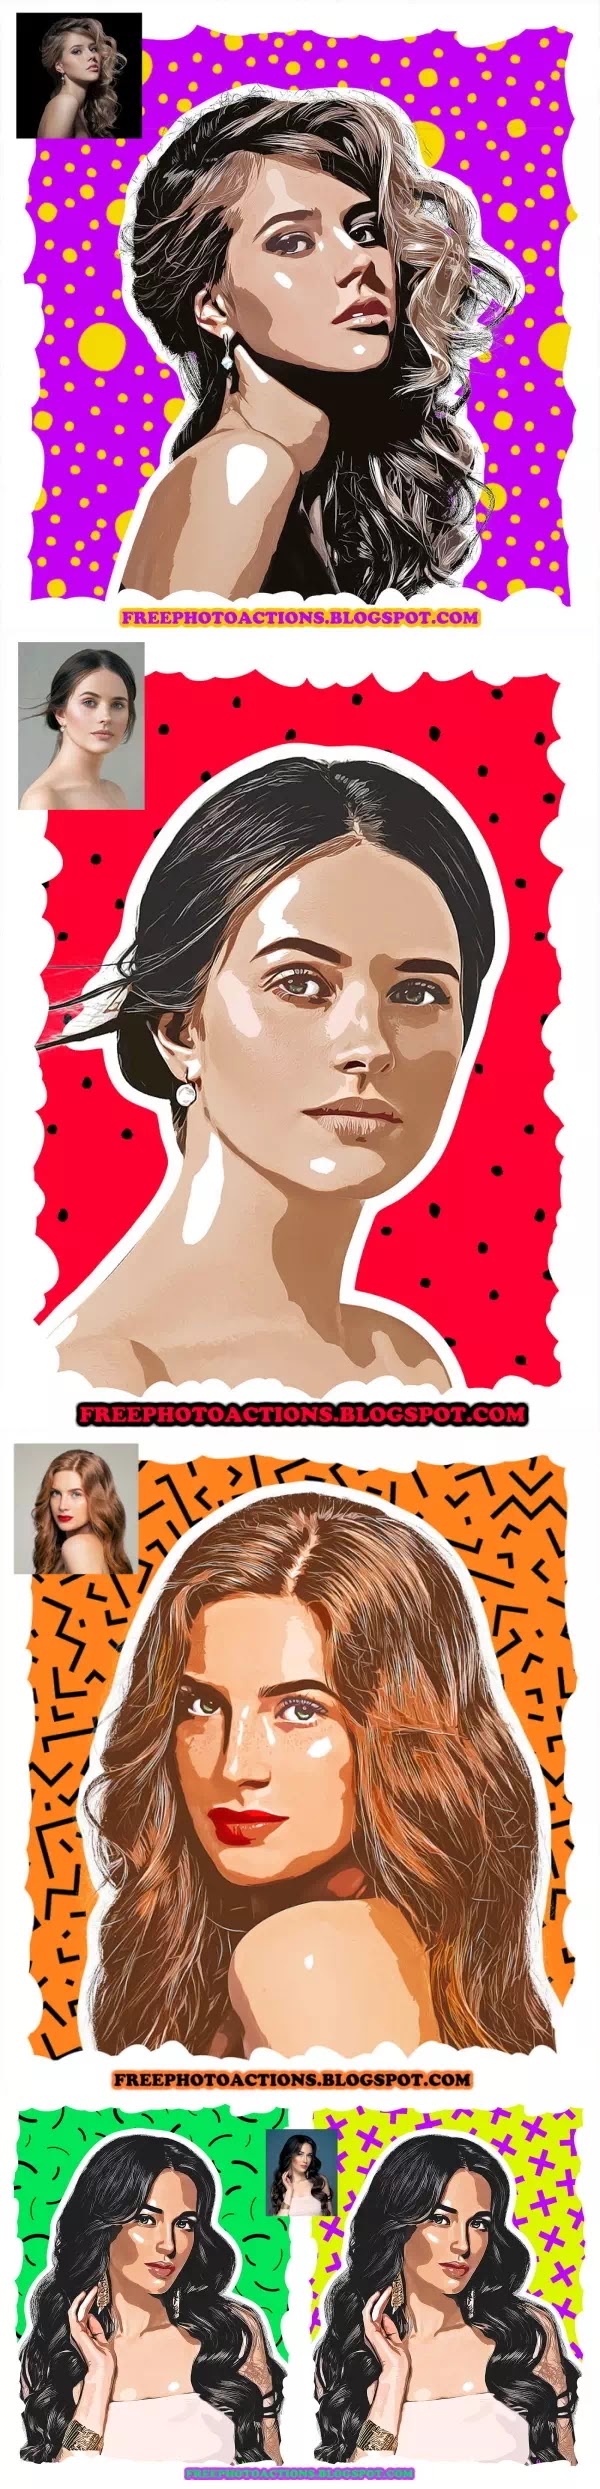 vector-photoshop-action-30936323-1